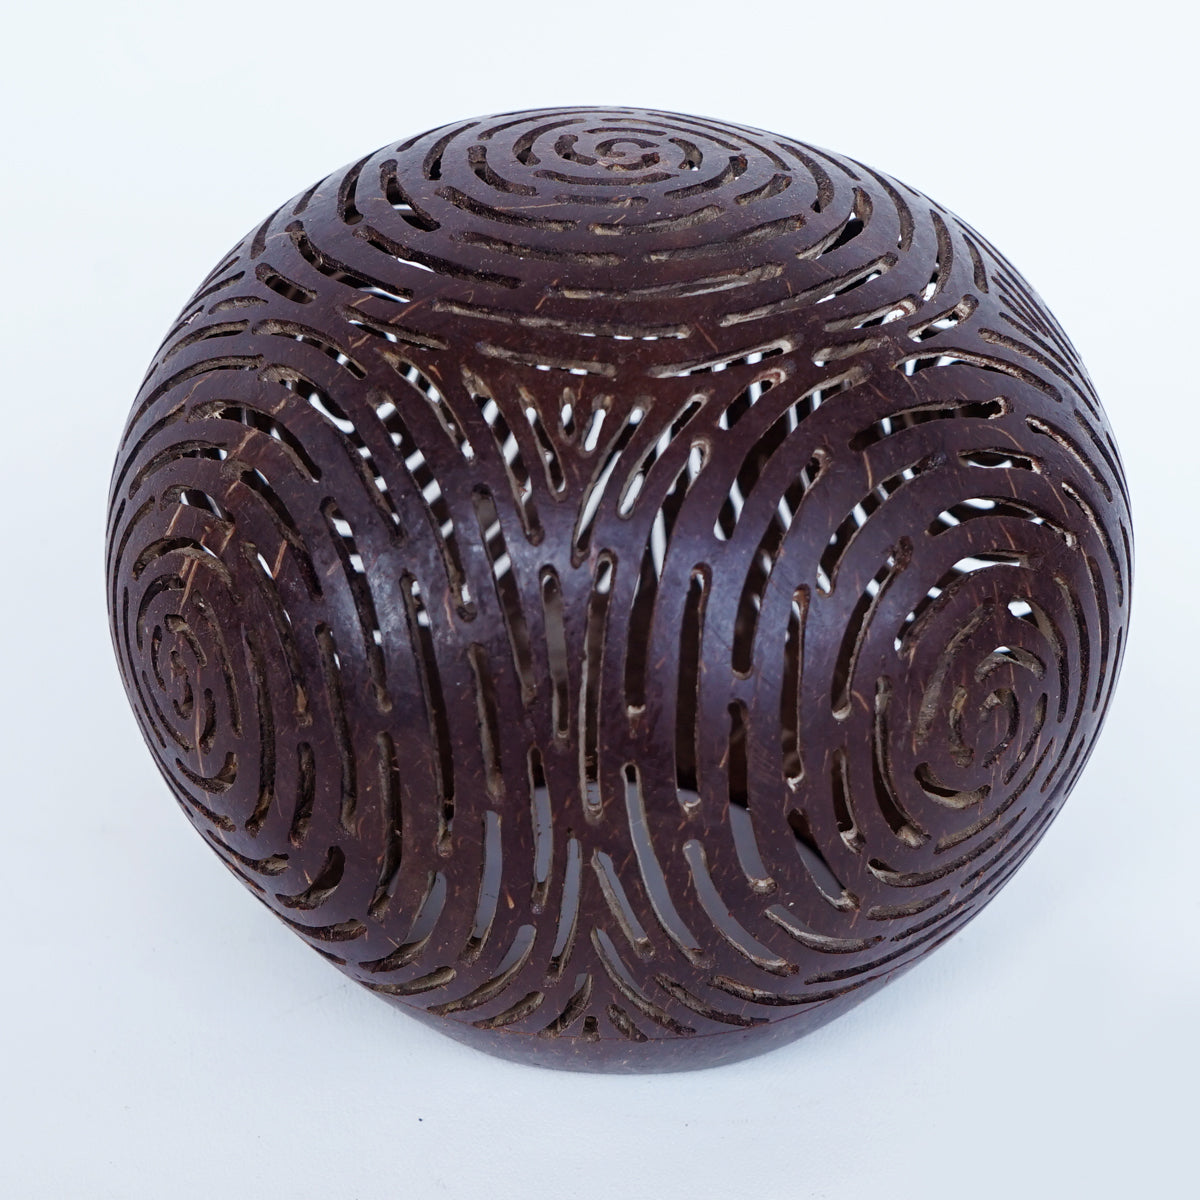 MULC022 NATURAL OLD COCONUT SHELL CARVED BOWL